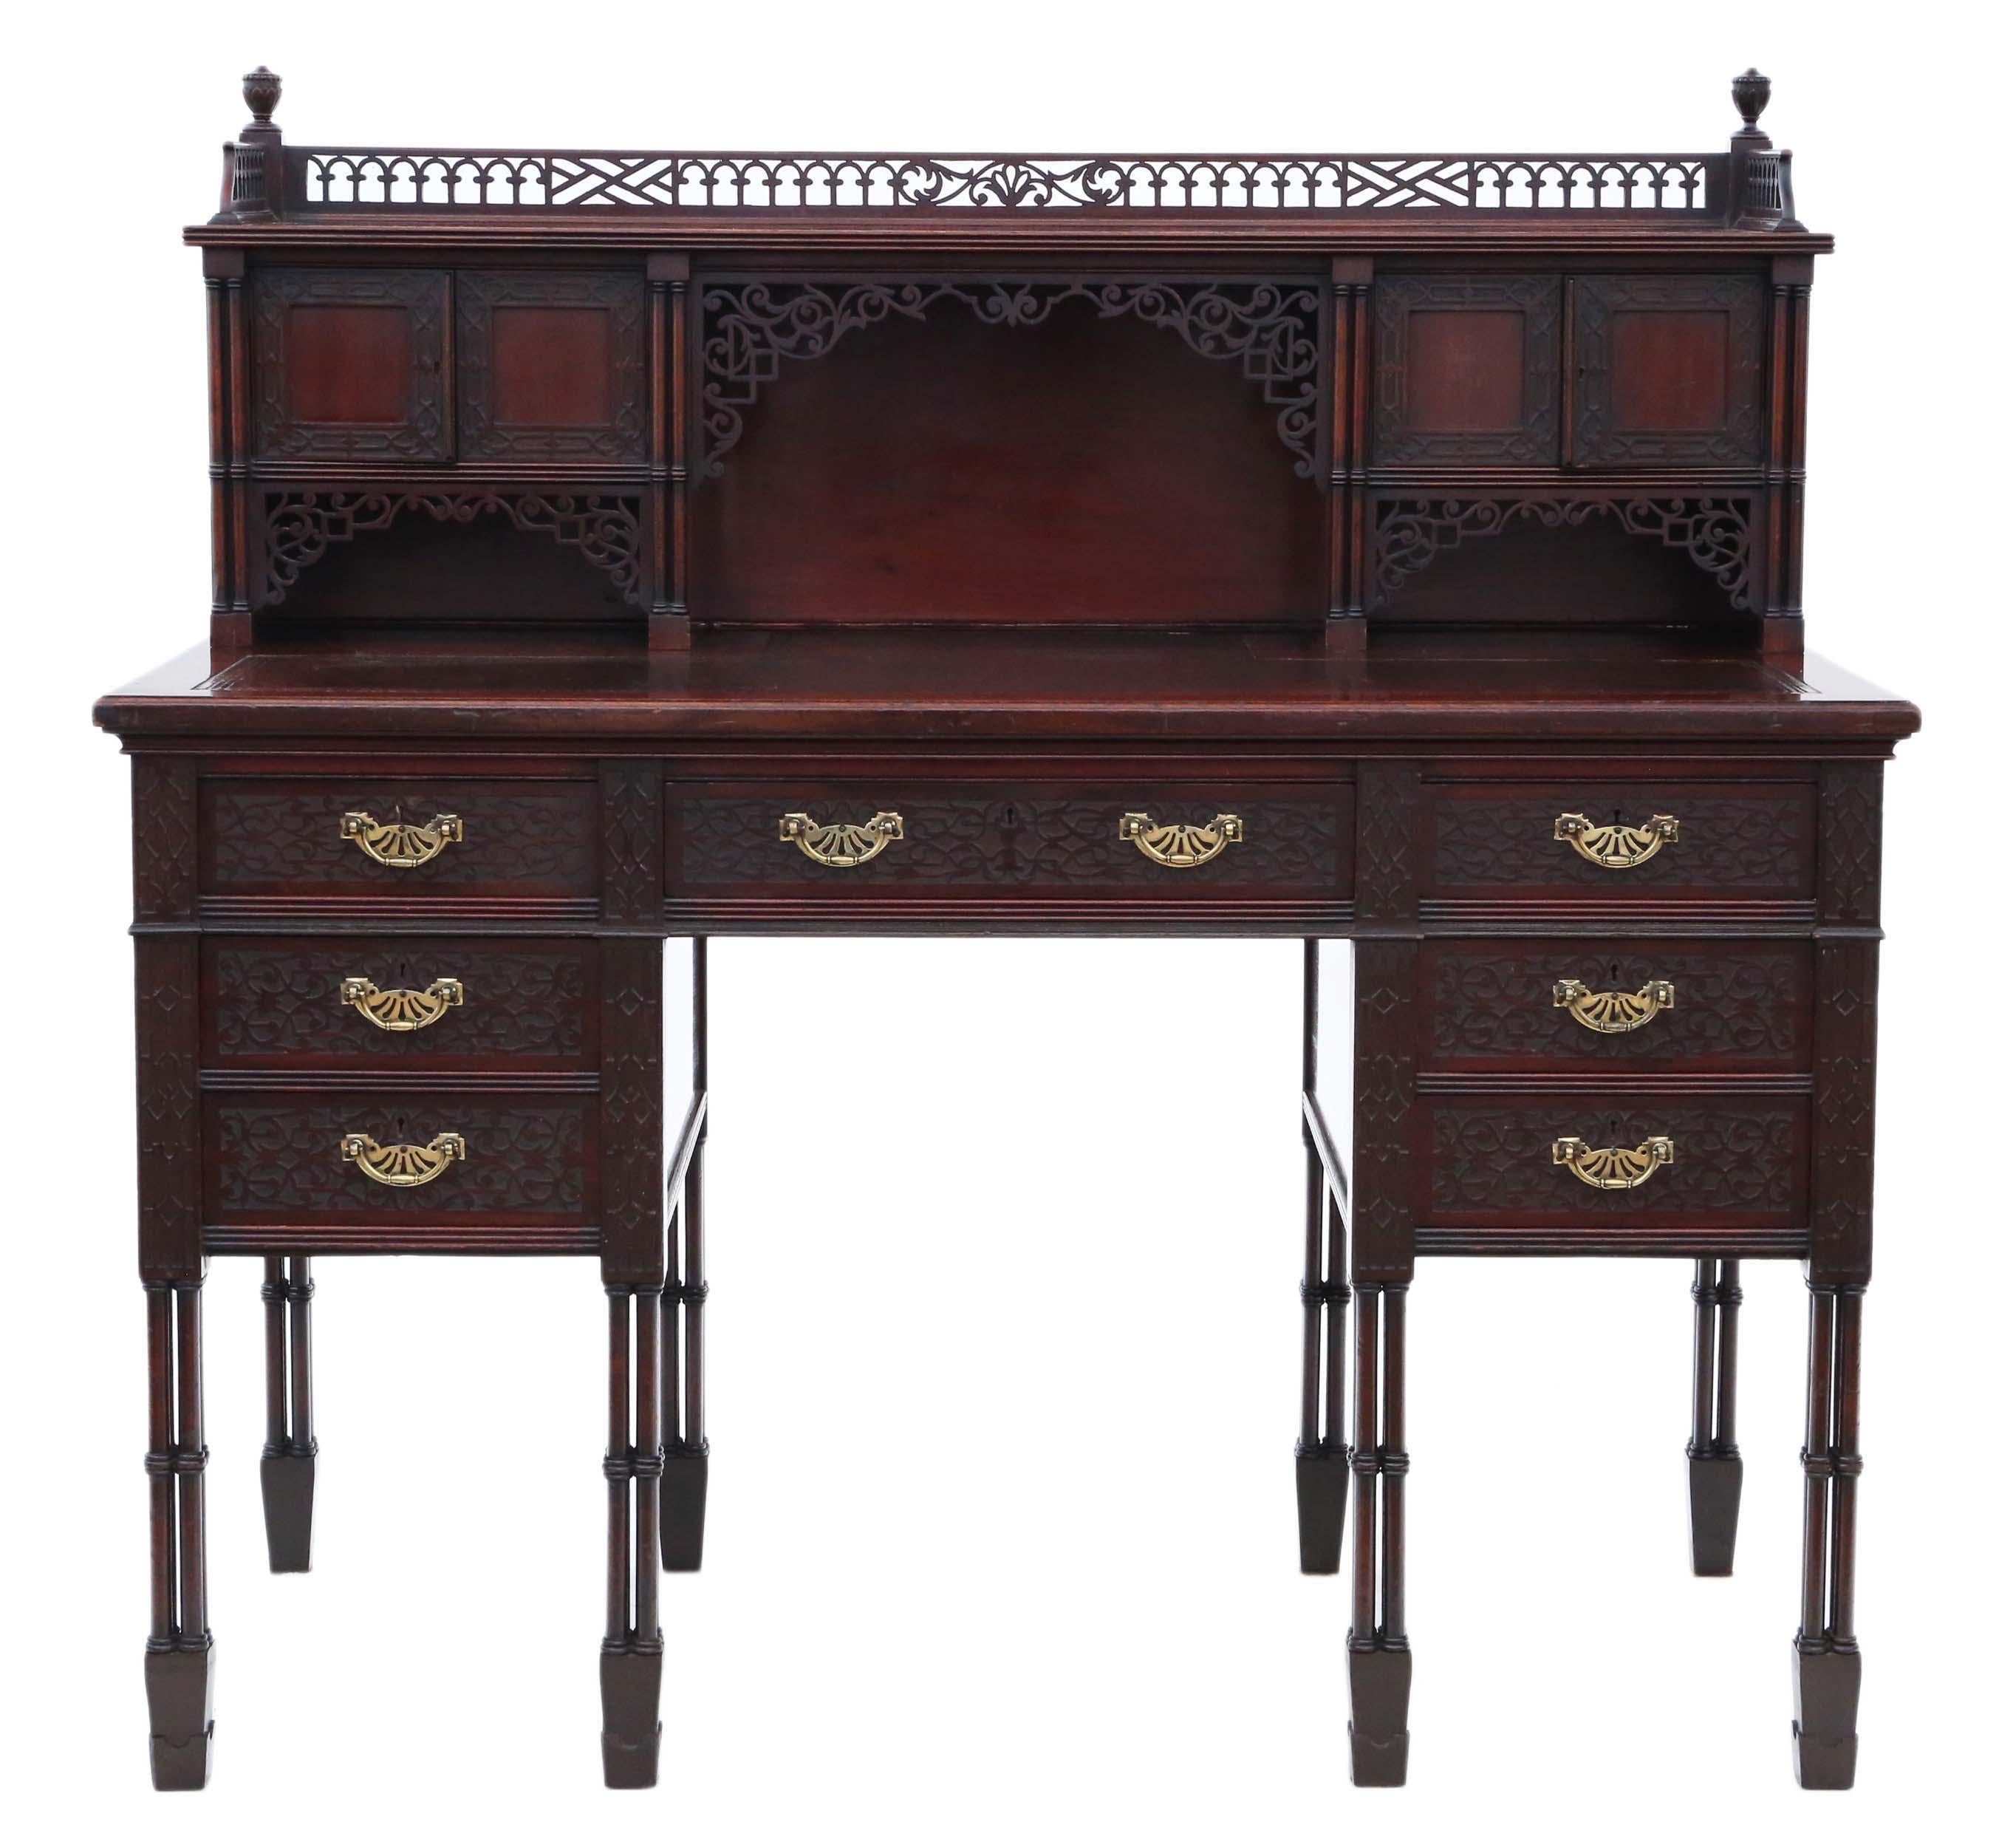 Antique Victorian Mahogany Twin Pedestal Desk Edwards & Roberts In Good Condition For Sale In Wisbech, Cambridgeshire